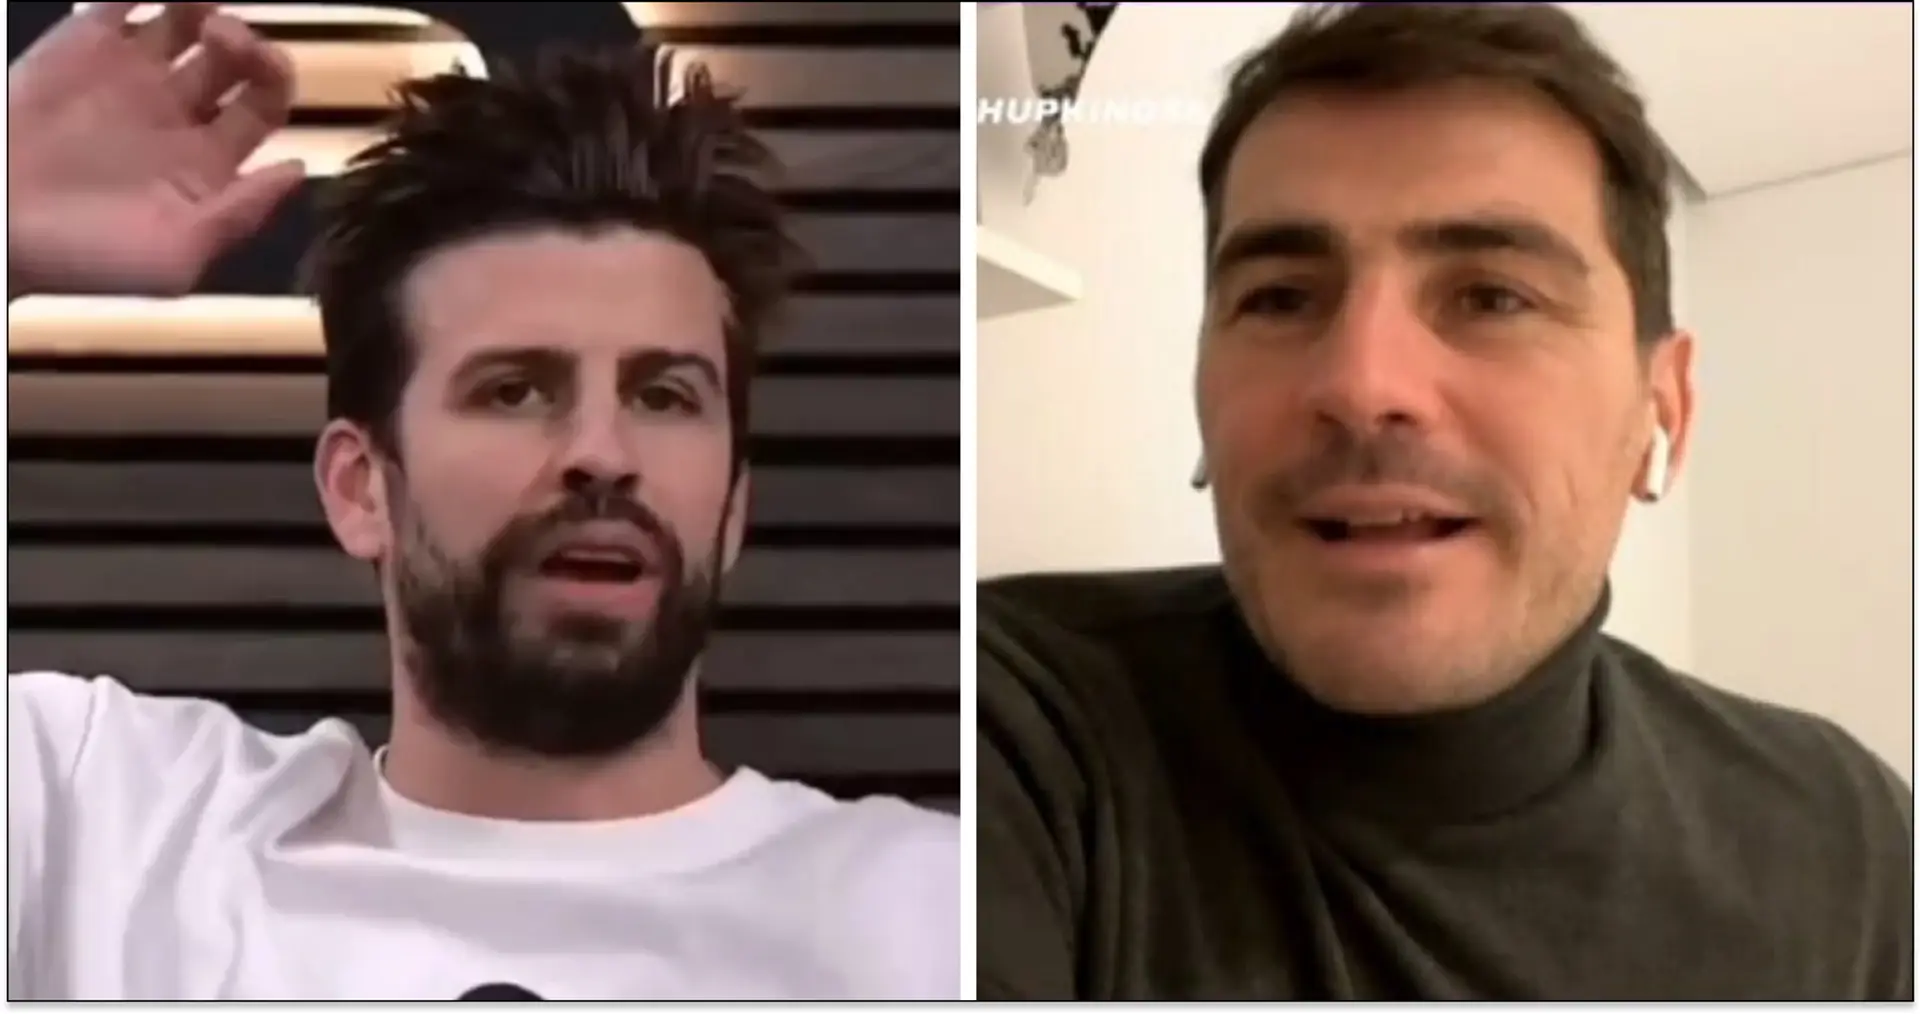 Pique tries to troll Madrid in conversation with Casillas, Iker brilliantly responds